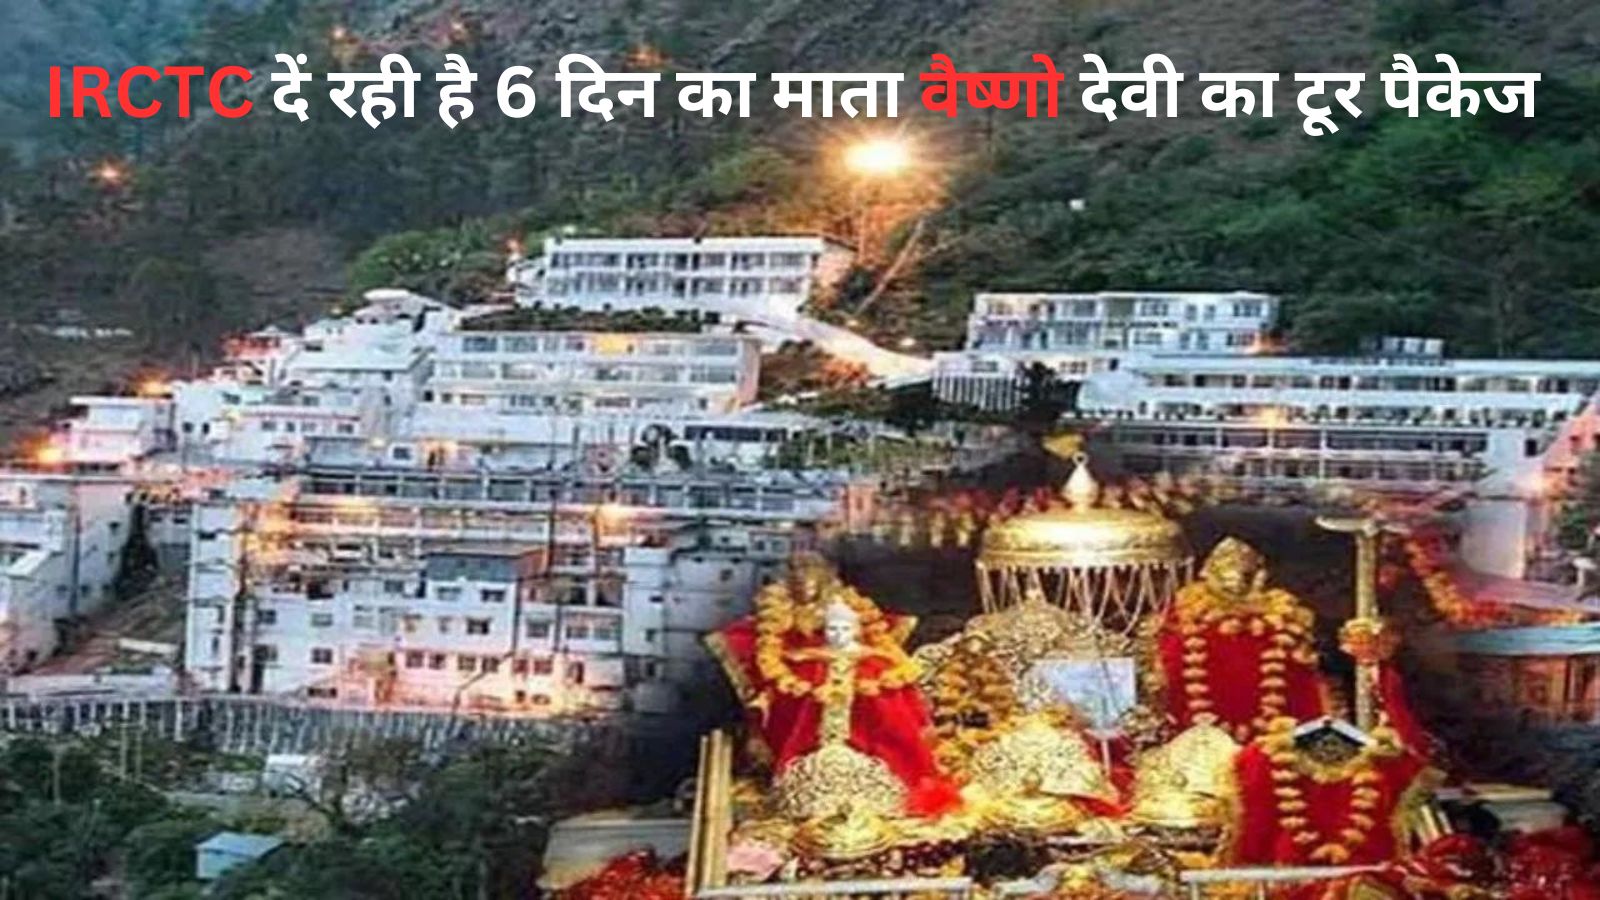 IRCTC is giving 6 days tour package of Mata Vaishno Devi